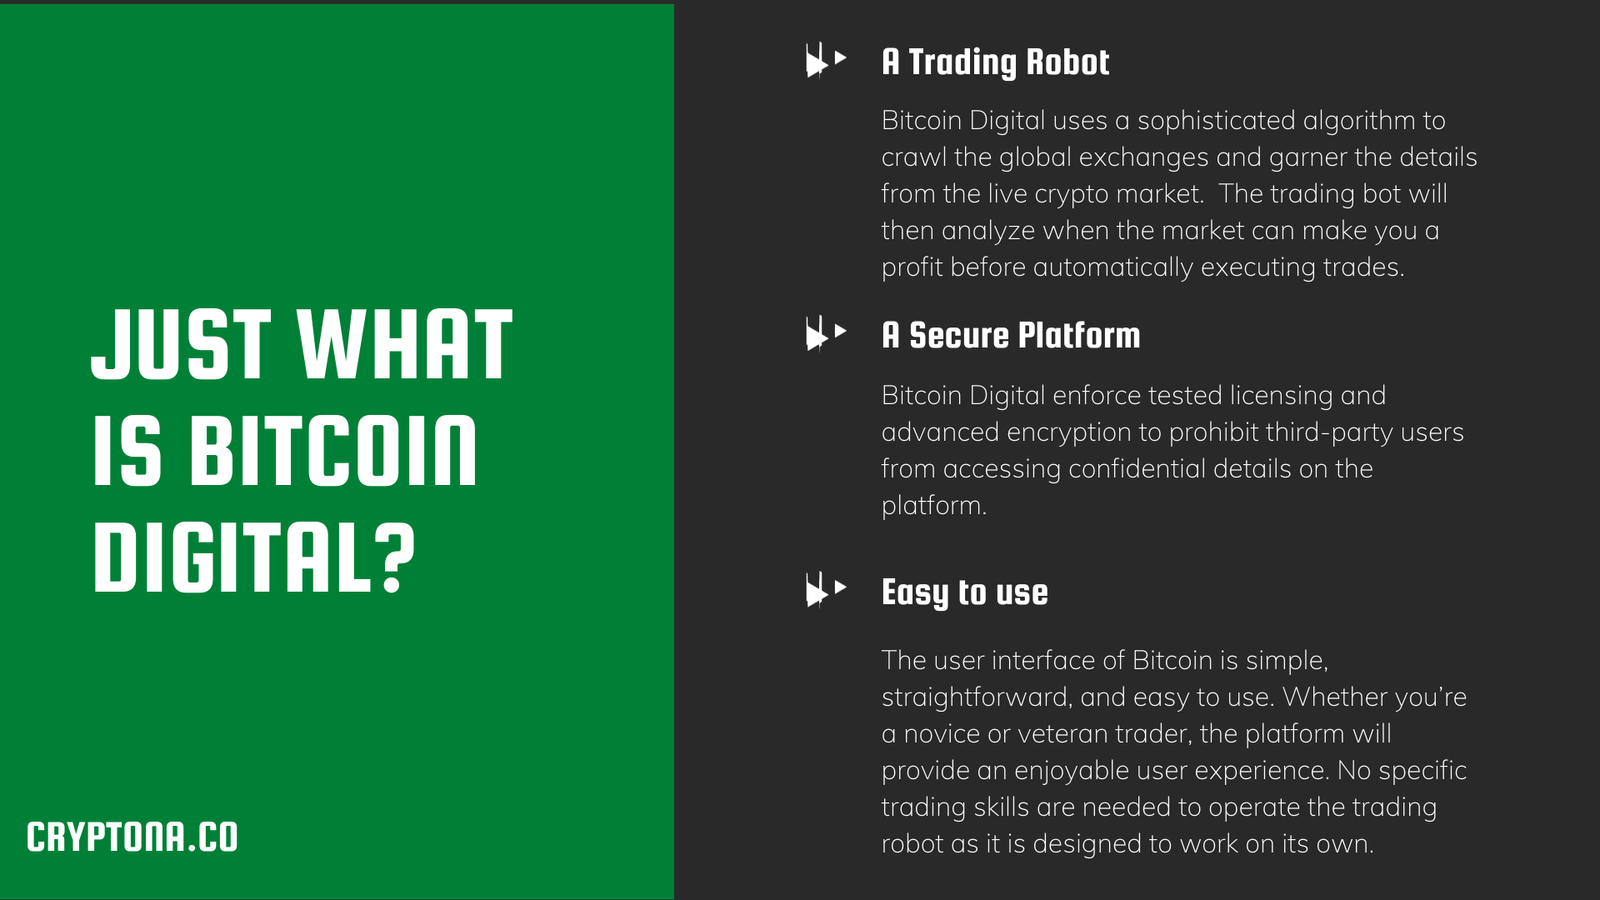 What is Bitcoin Digital?